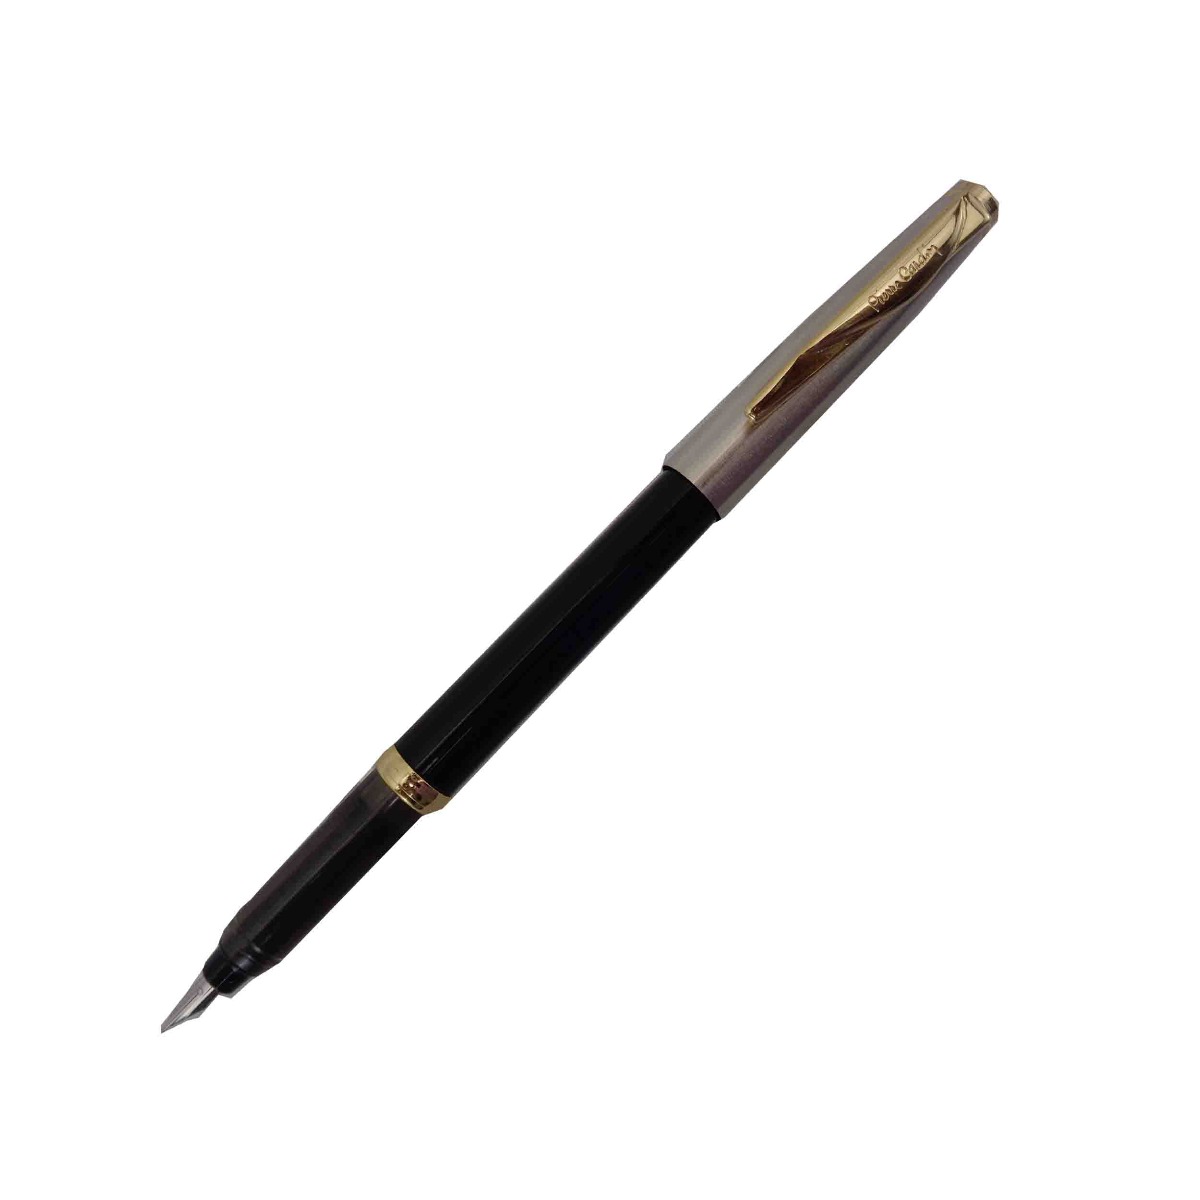 Pierre Cardin Momento Half GoldModel:15614 Black Color Body With Silver Cap Type Fine Nib With 1 Ink Converter and 2 Extra Long Catridge Fountain Pen